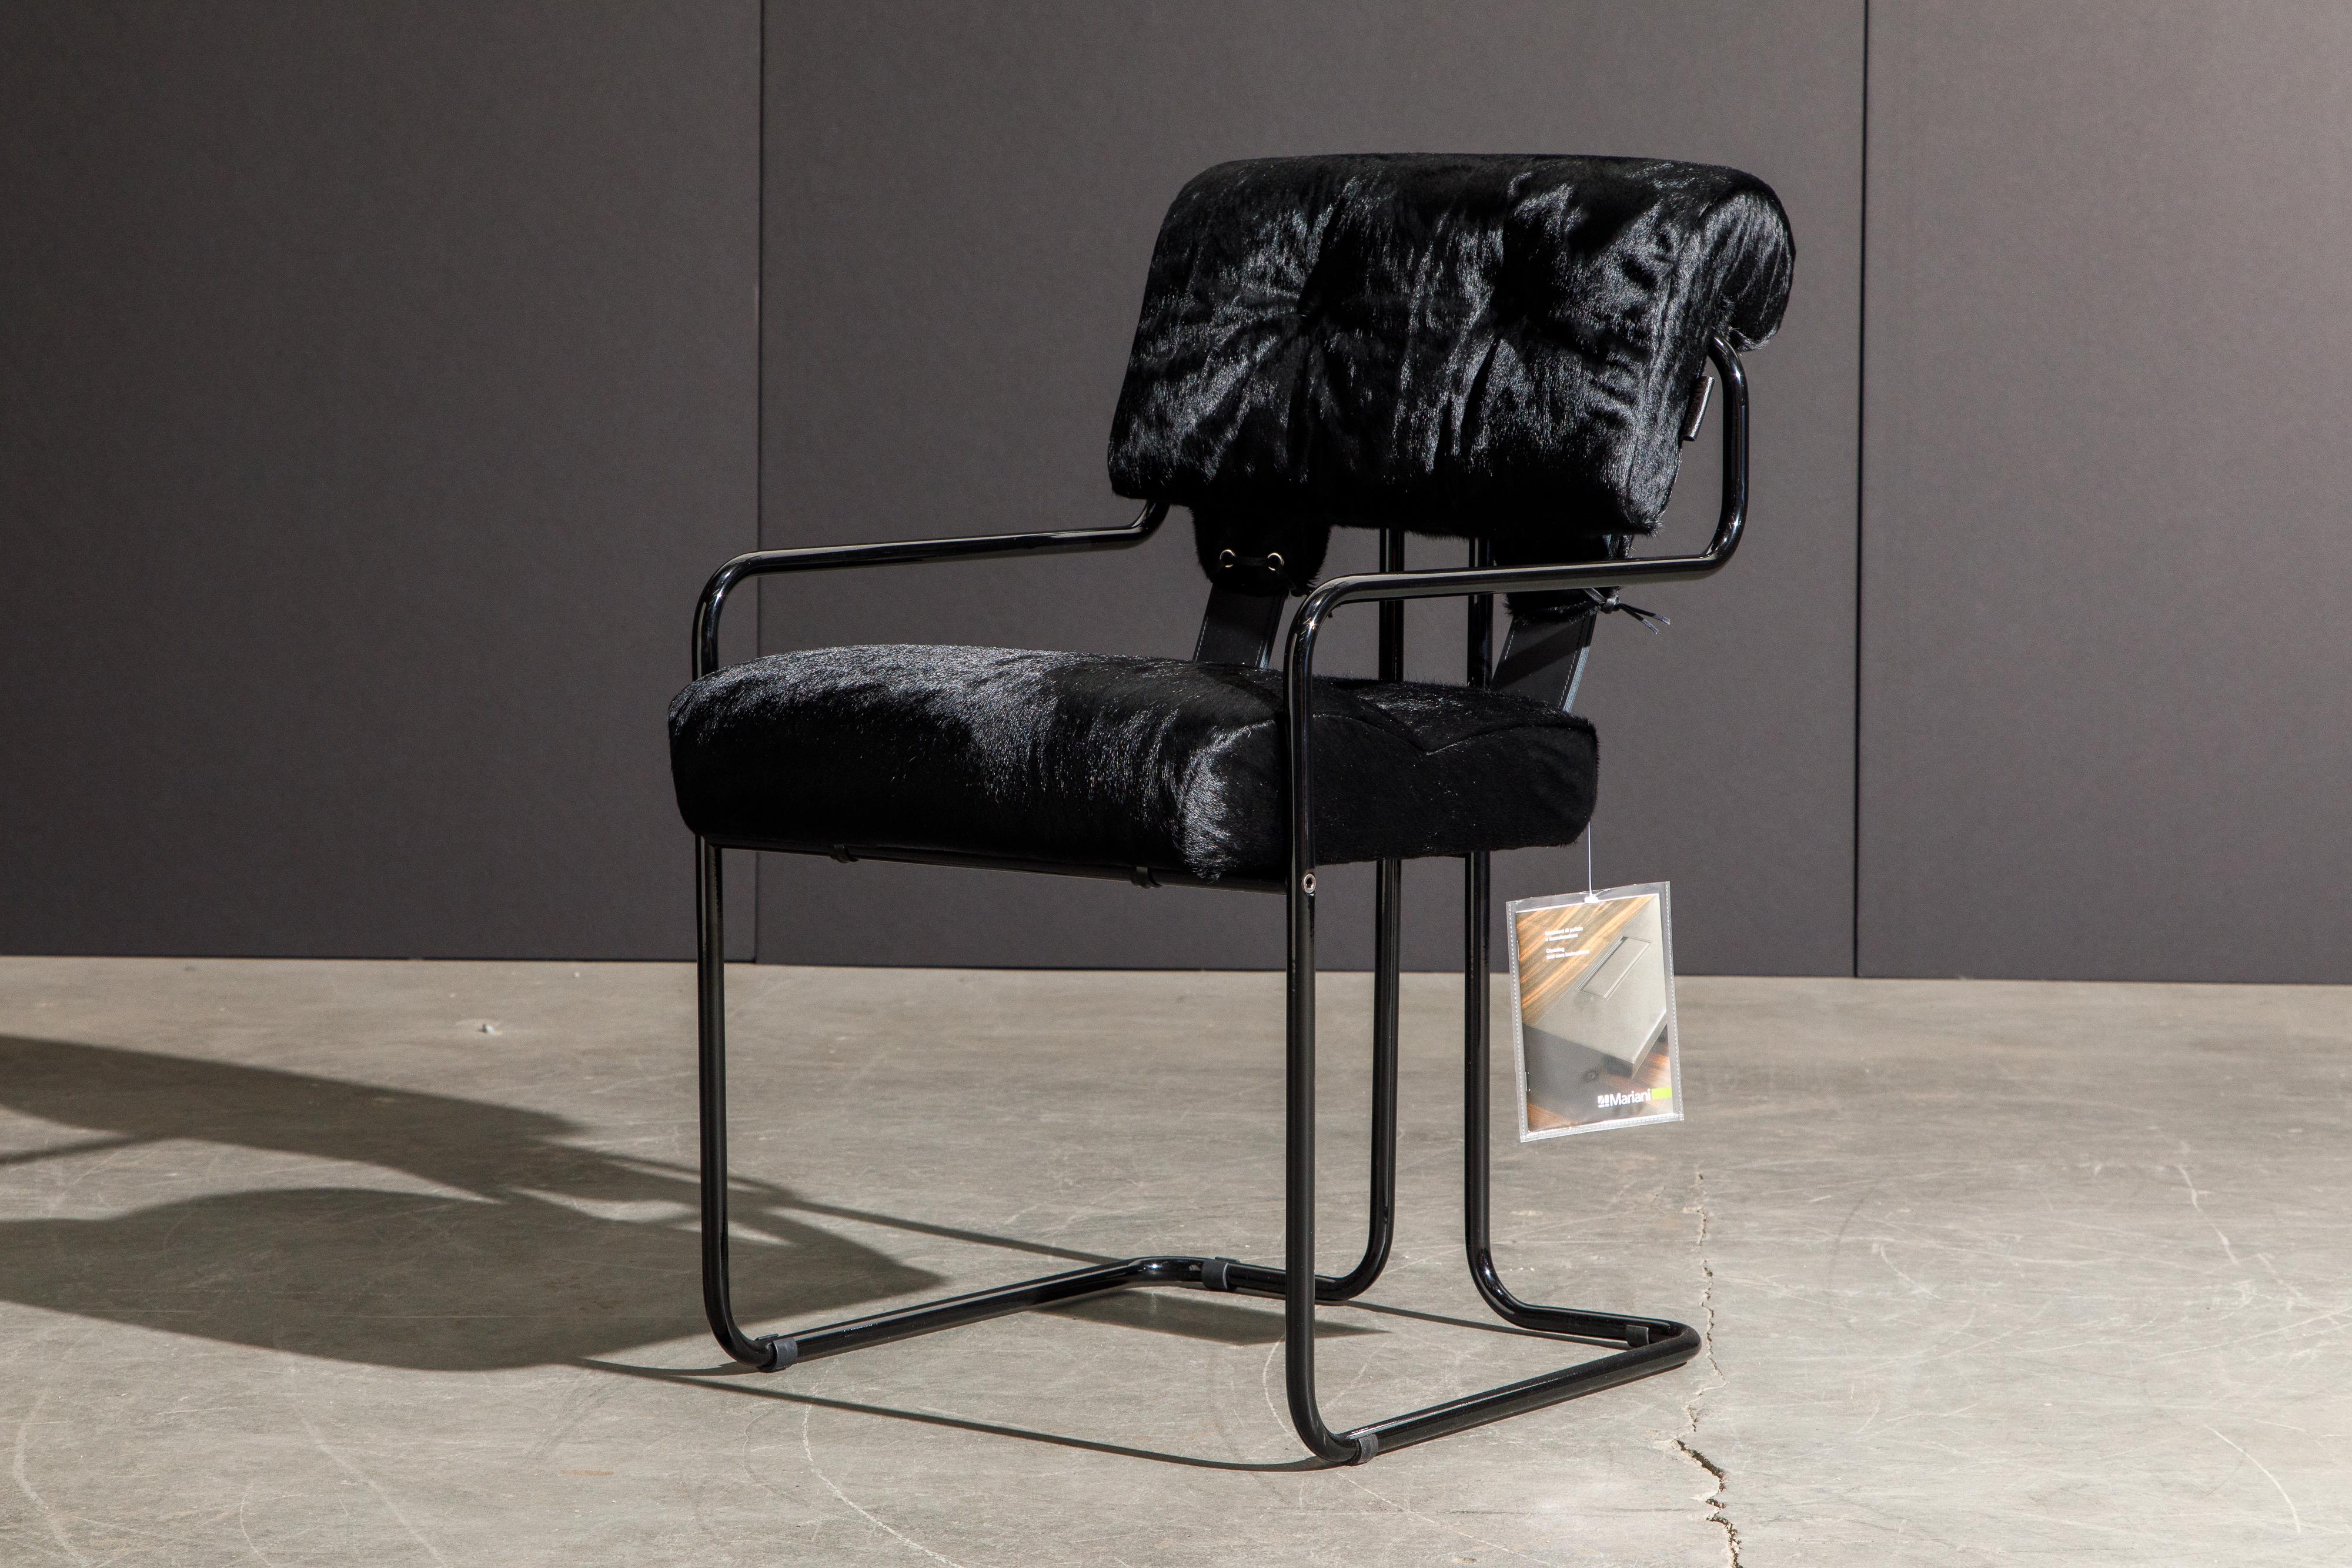 Currently, the most coveted dining chairs by interior designers are 'Tucroma' chairs by Guido Faleschini for i4 Mariani, and we have this incredible Tucroma armchair (brand new) in beautiful black cowhide leather with black lacquered frames. The